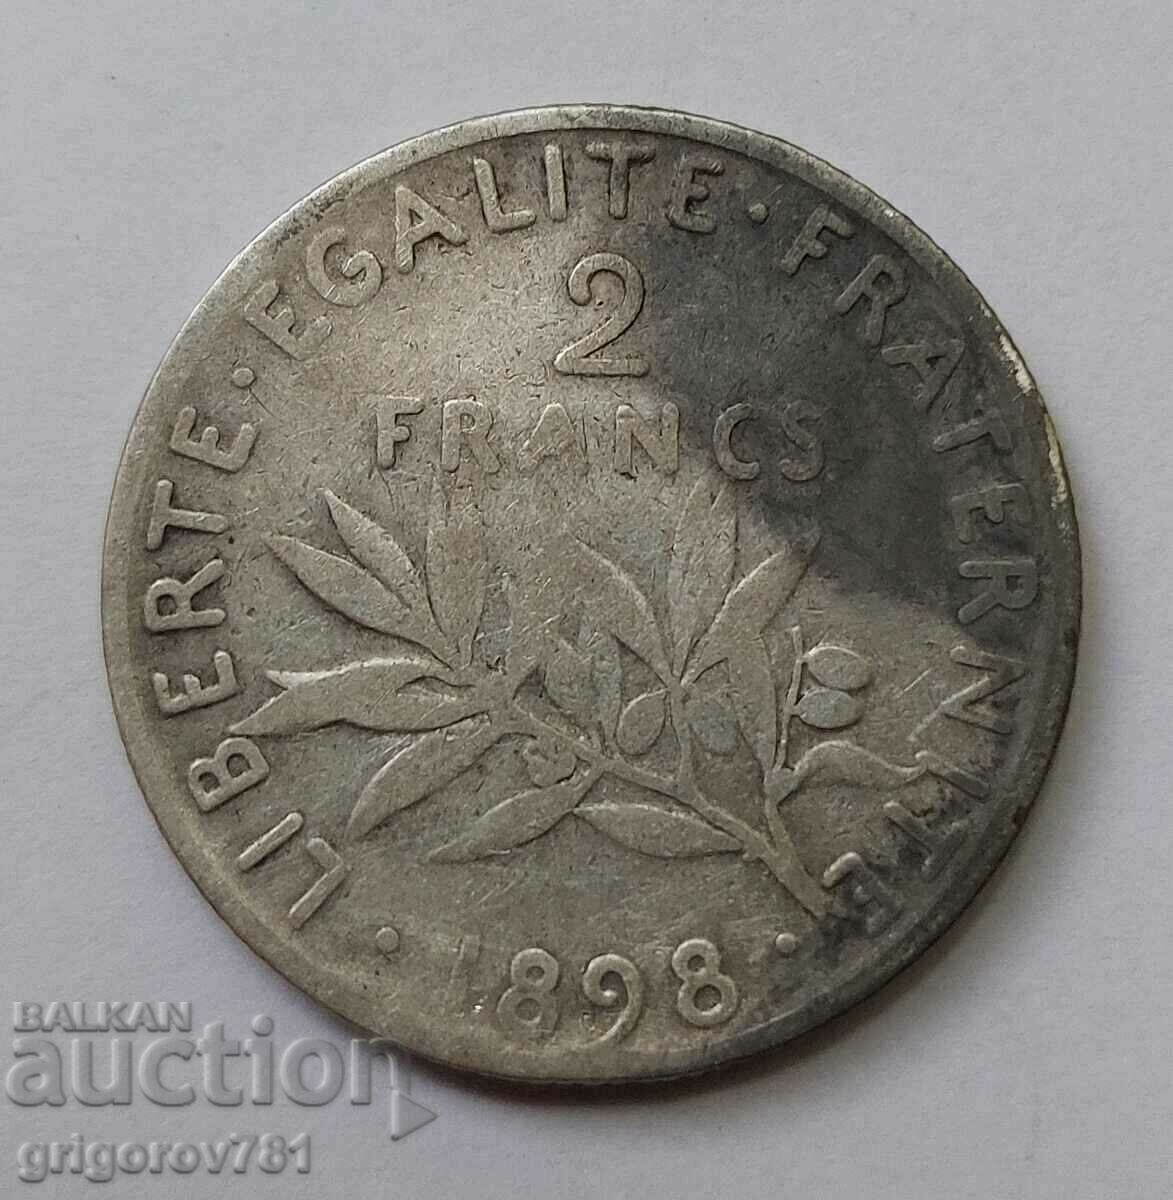 2 Francs Silver France 1898 - Silver Coin #152